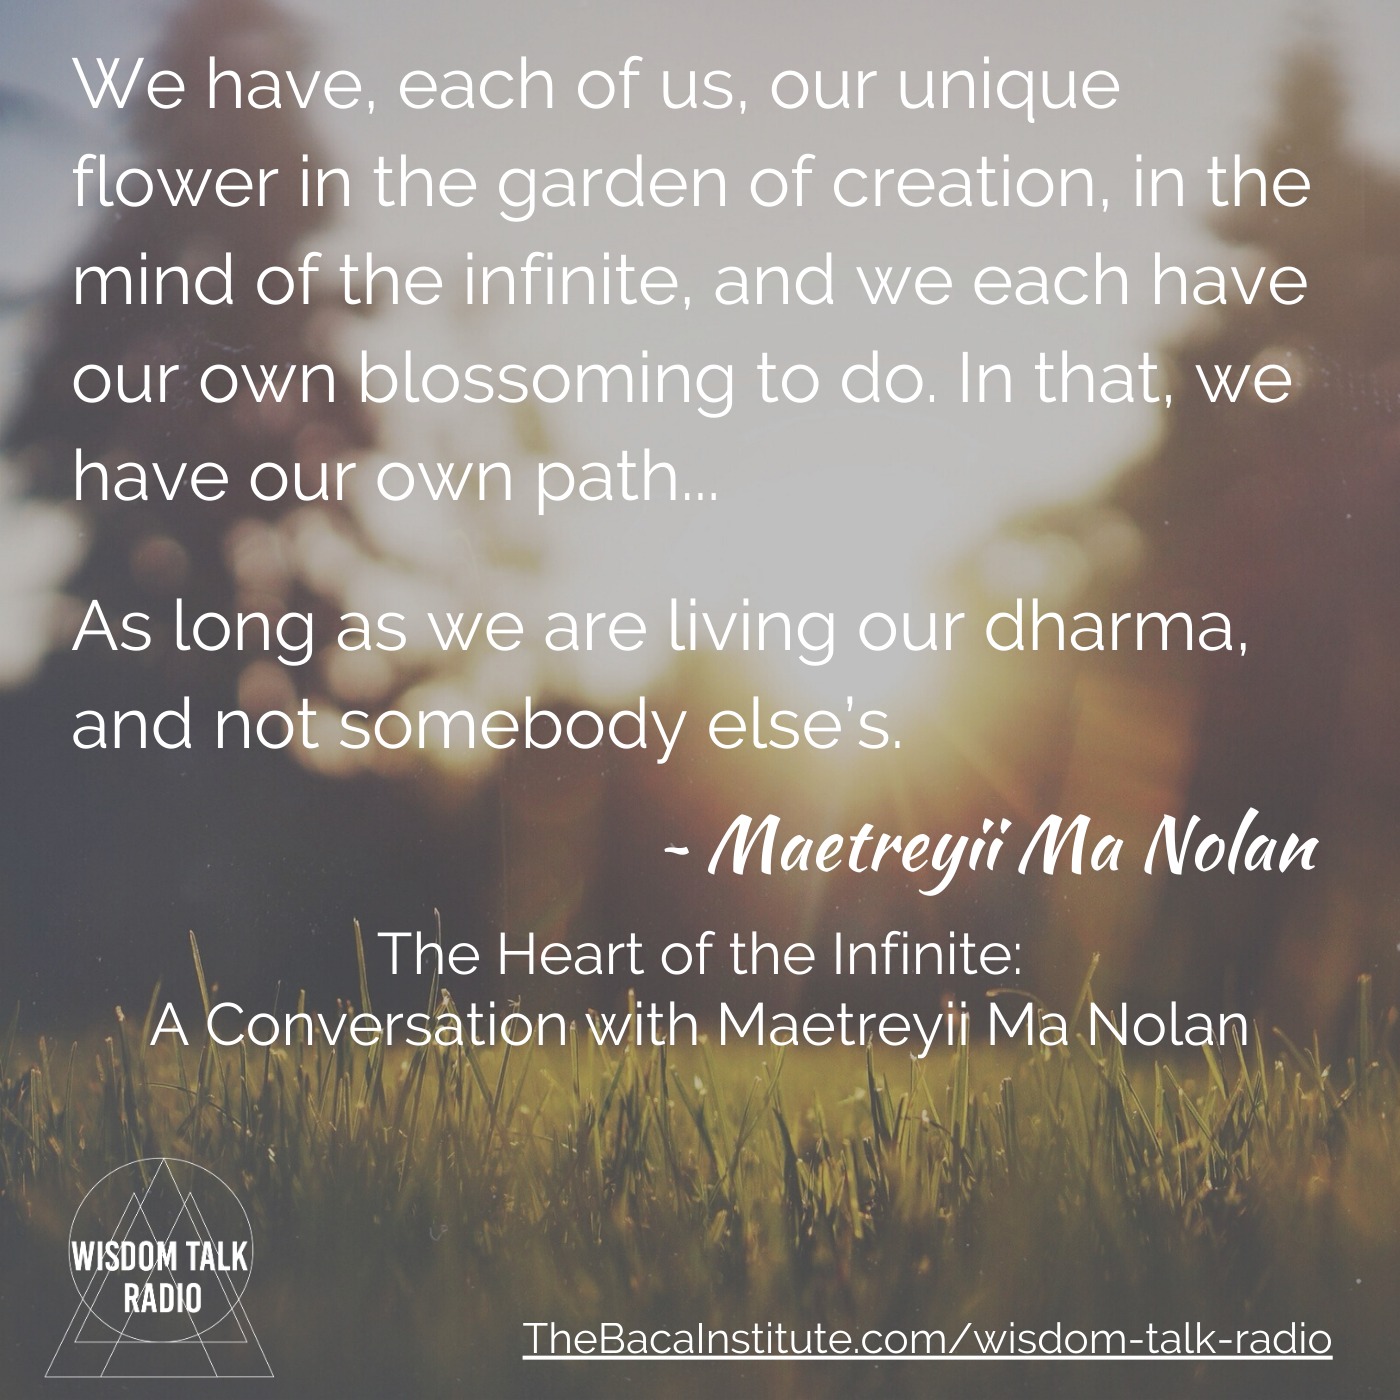 The Heart of the Infinite: a Conversation with Maetreyii Ma Nolan